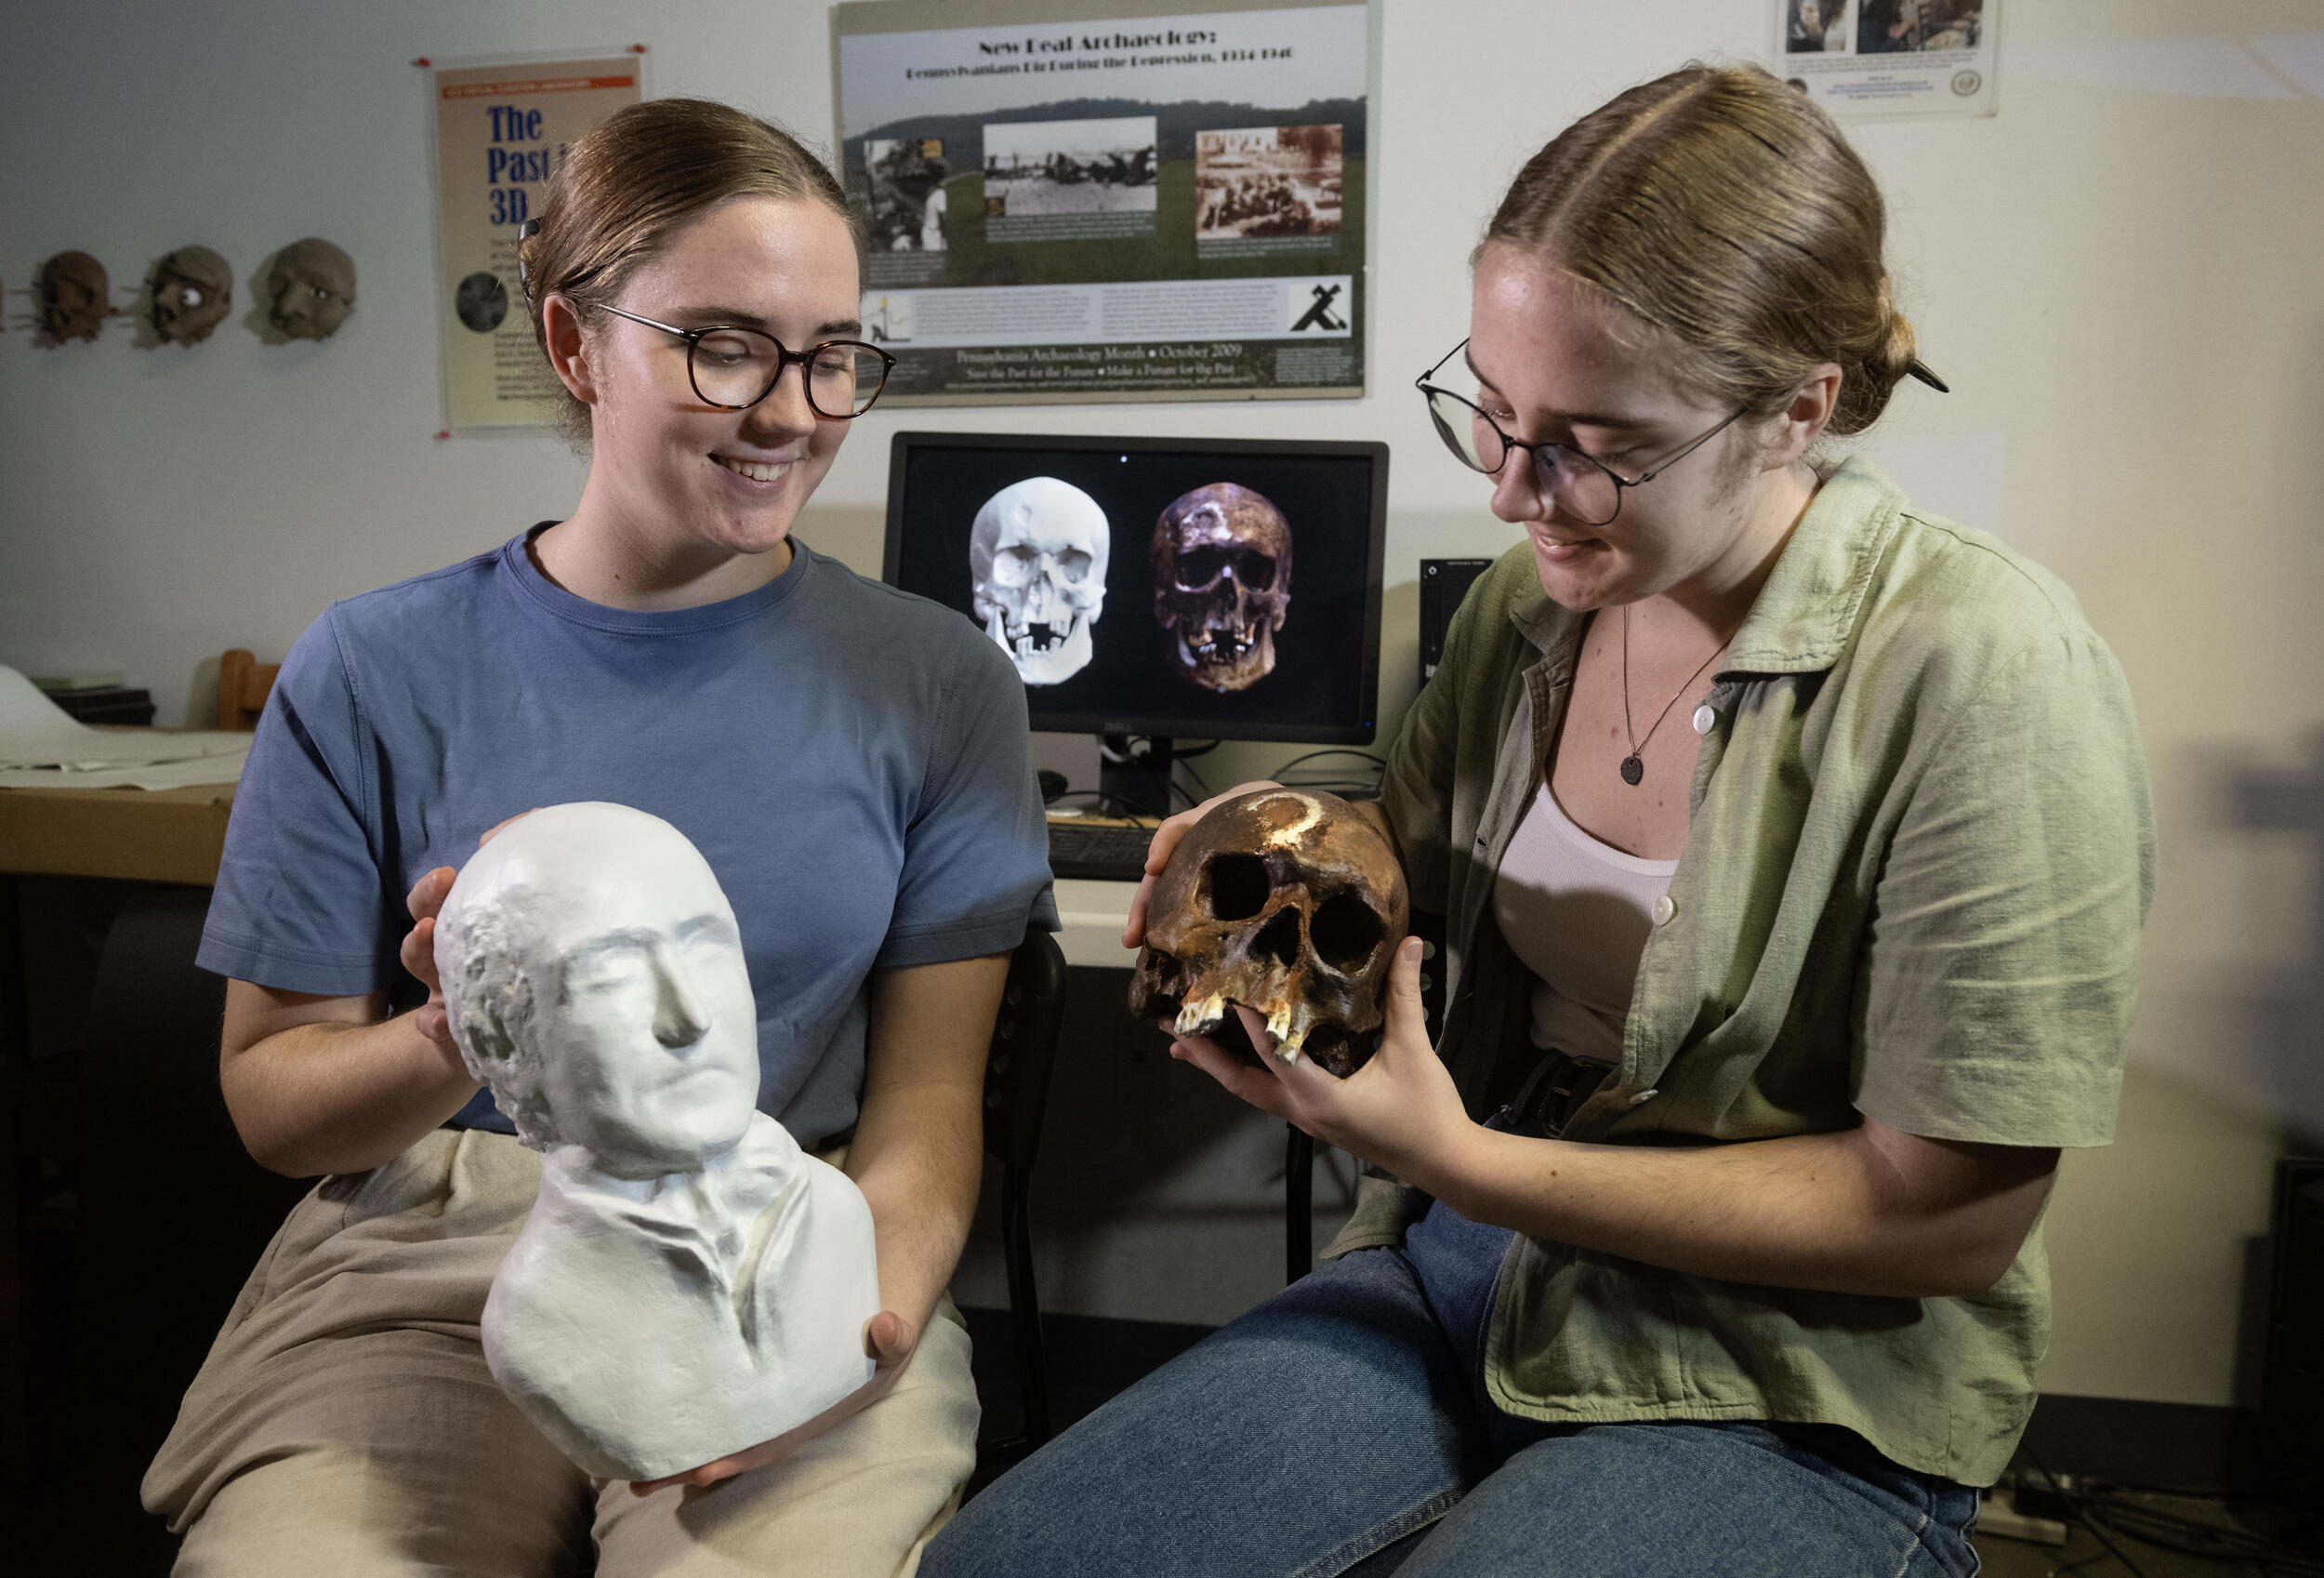 Two women sitting next to each other holding objects. The woman on the left is holding a statue bust, and the woman on the right is holding a skull. 